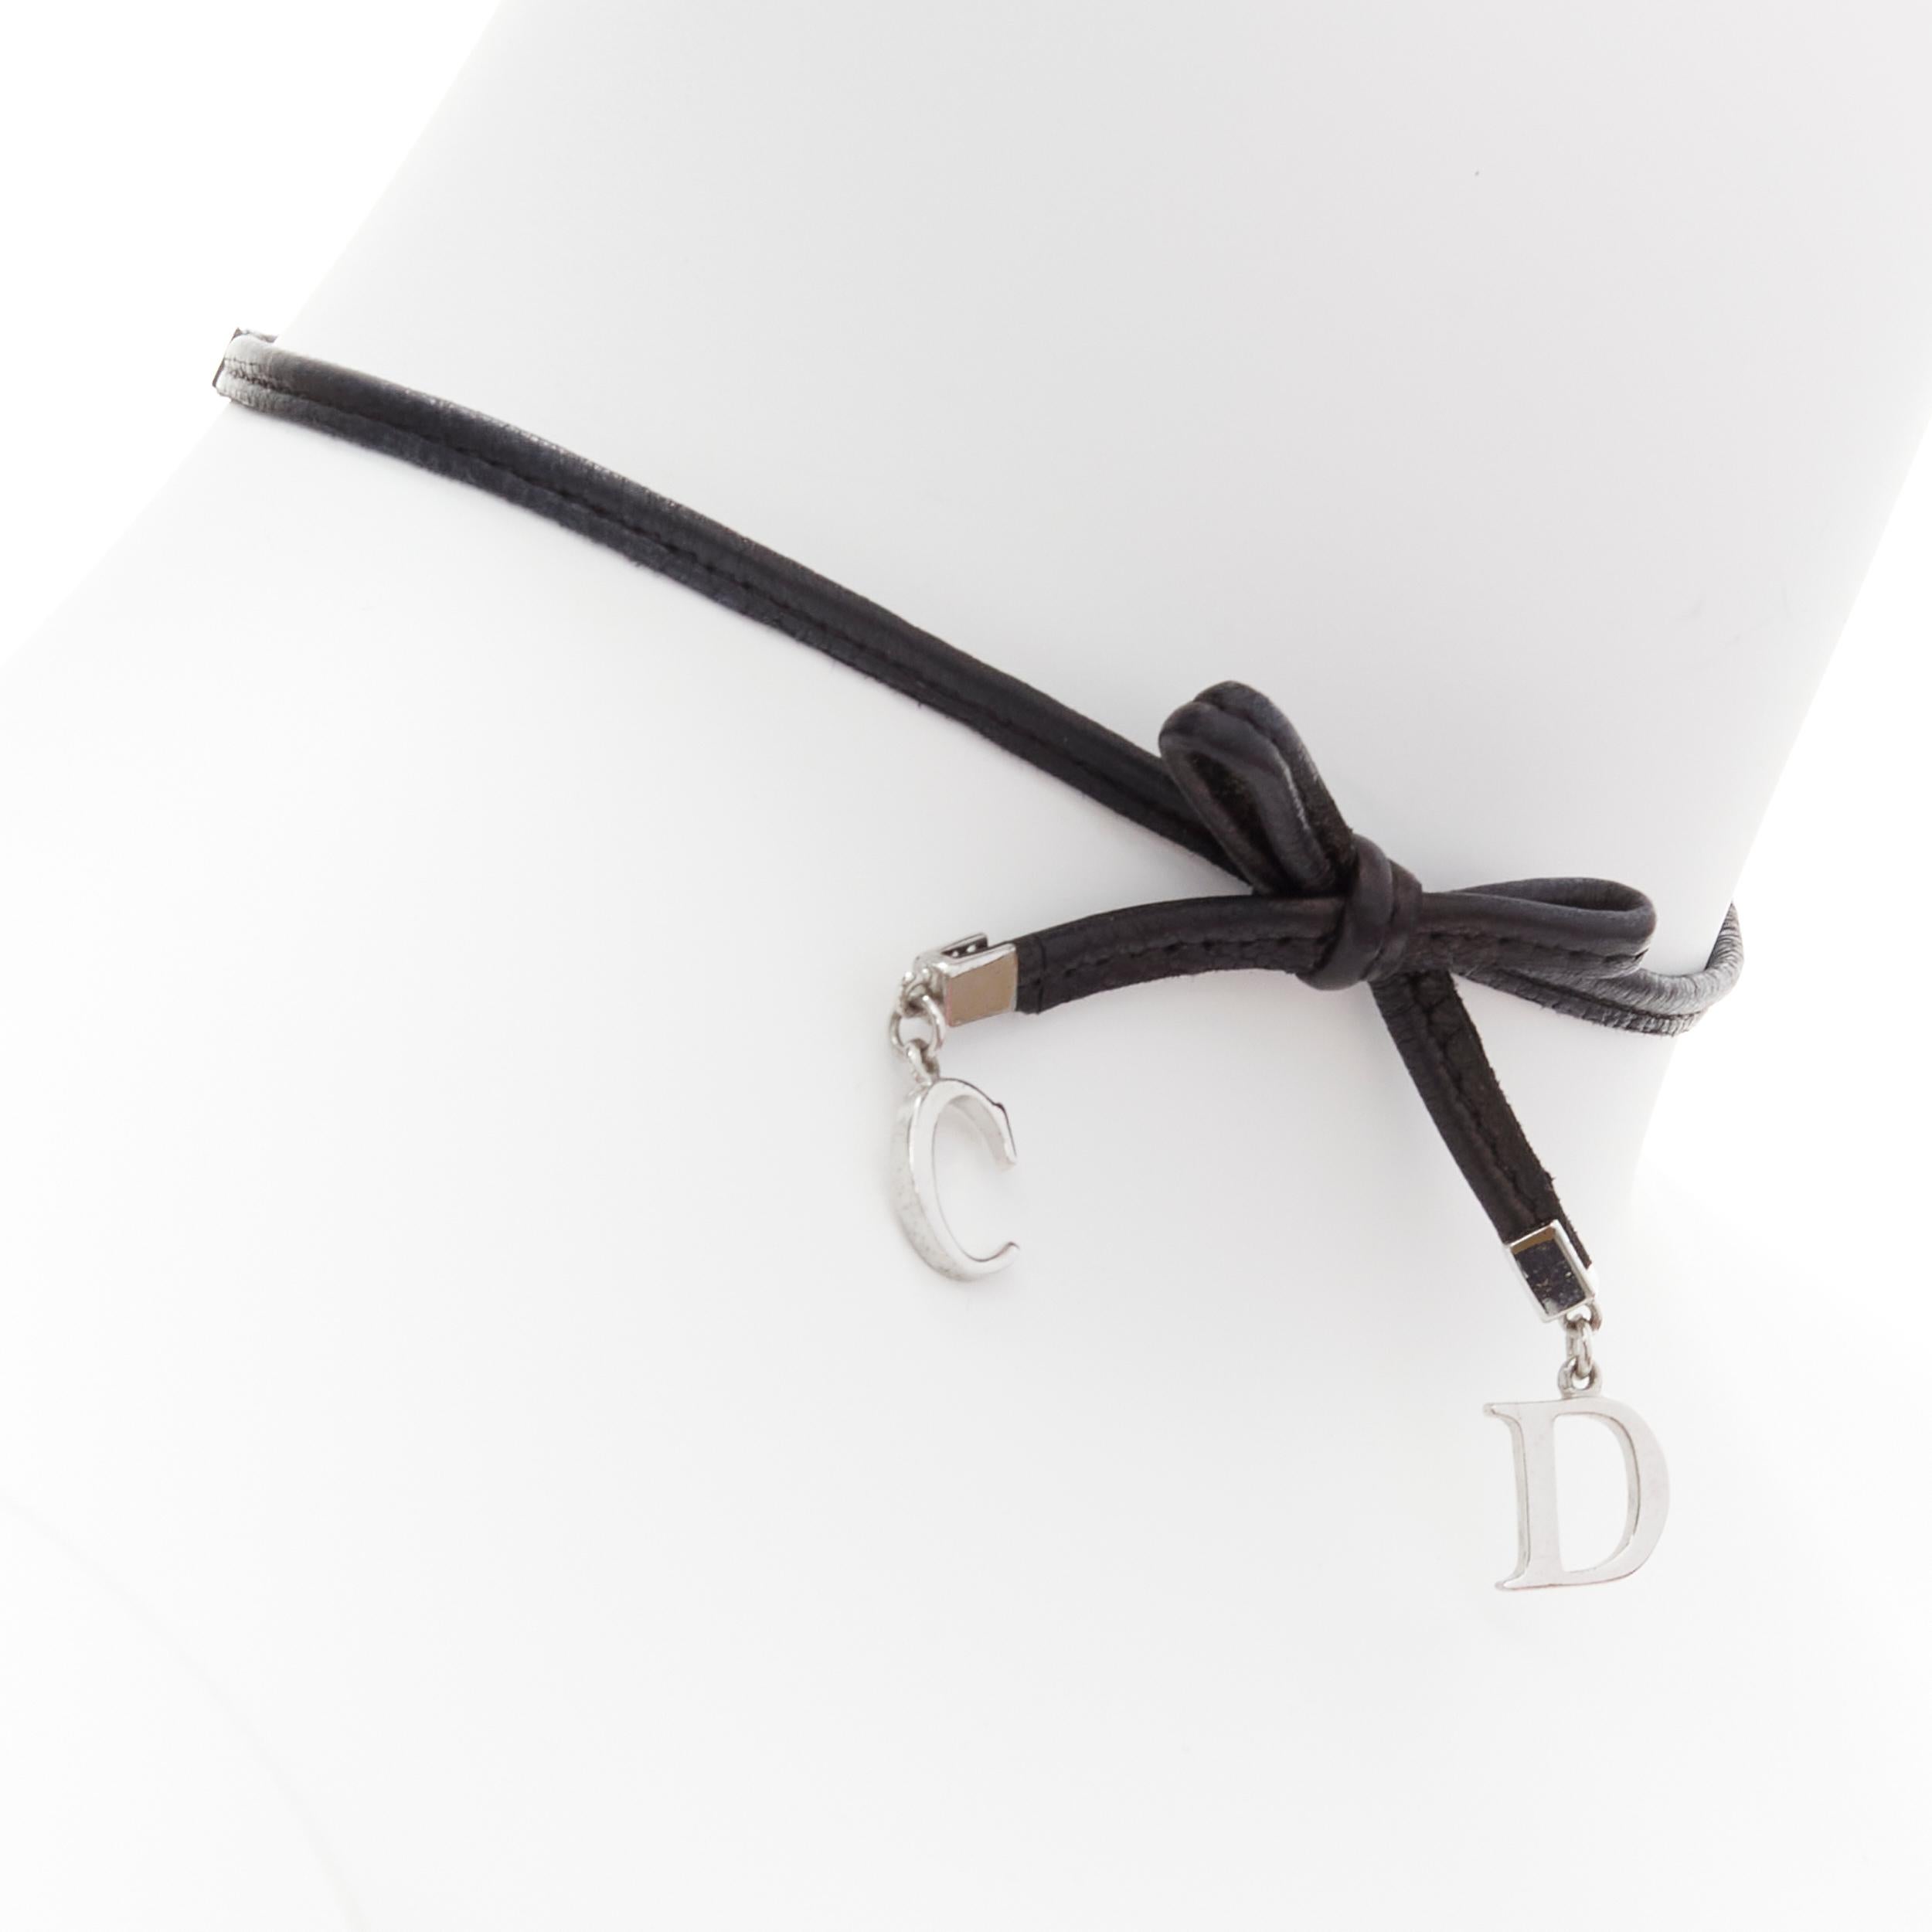 CHRISTIAN DIOR Galliano Vintage CD logo leather bow punk choker necklace
Reference: TGAS/C02037
Brand: Christian Dior
Designer: John Galliano
Material: Leather, Metal
Color: Black, Silver
Pattern: Solid
Closure: Hook & Bar

CONDITION:
Condition: